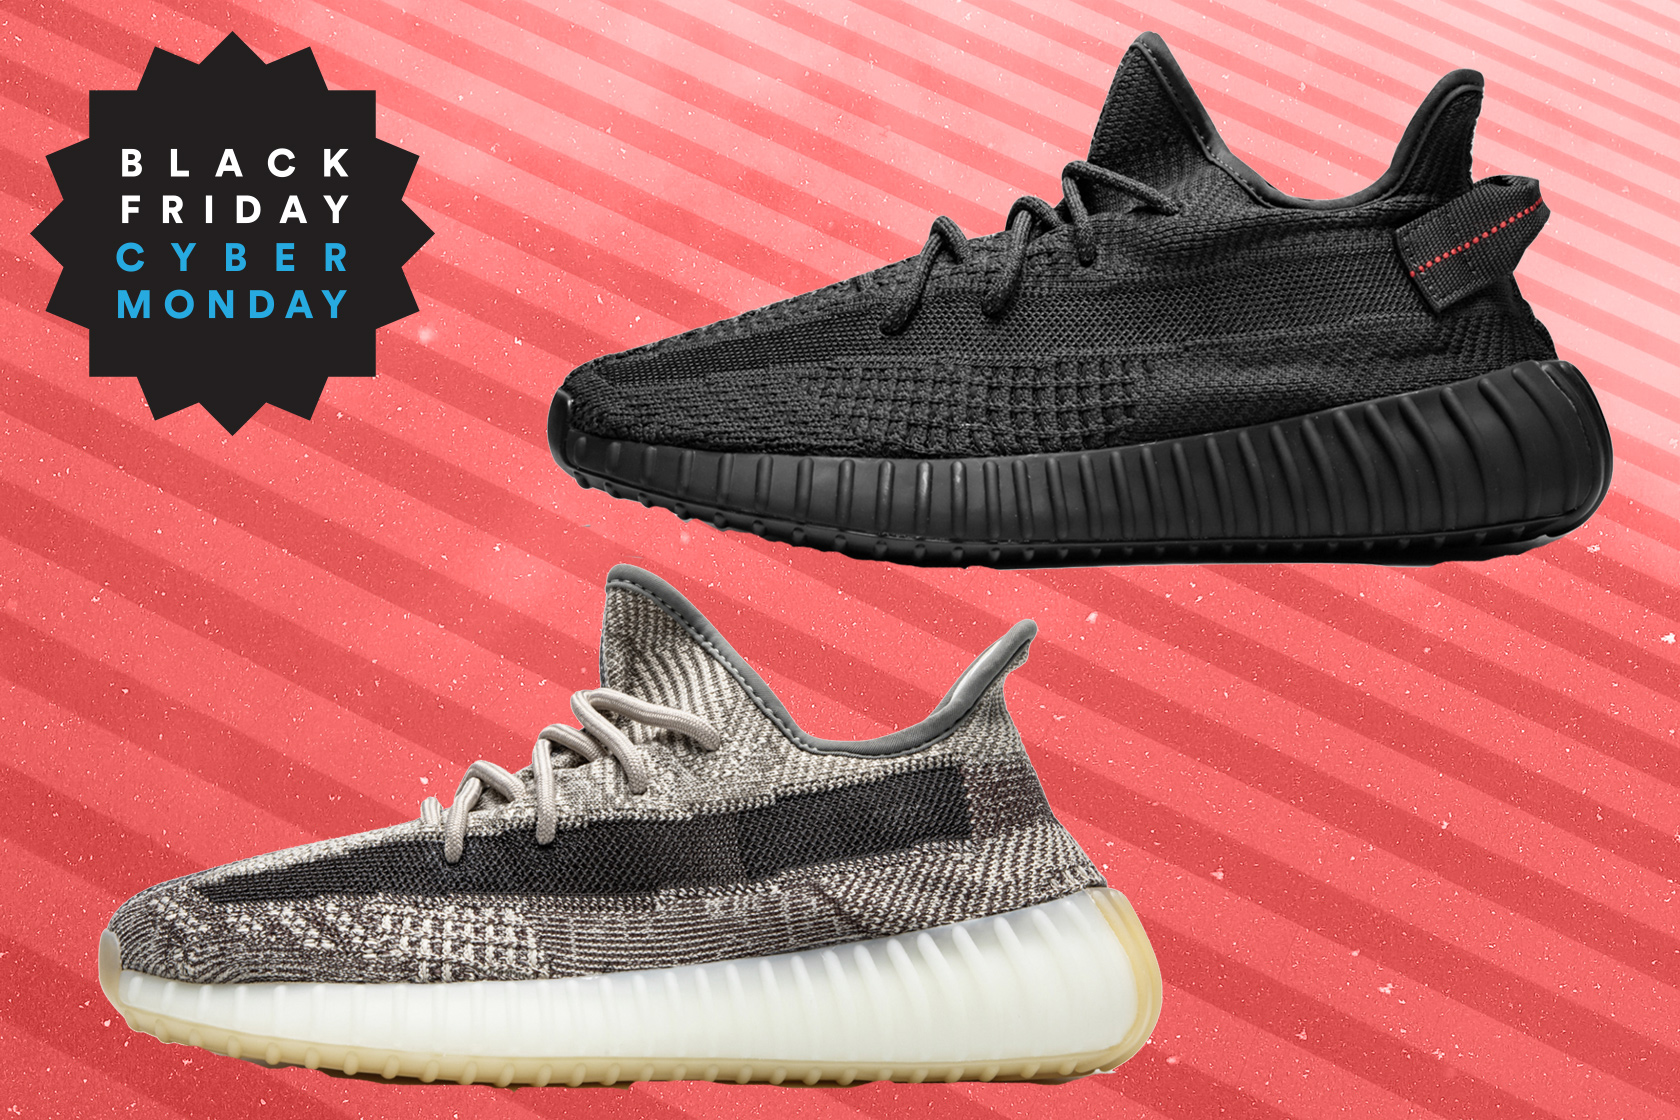 Yeezys on sale for Cyber Monday